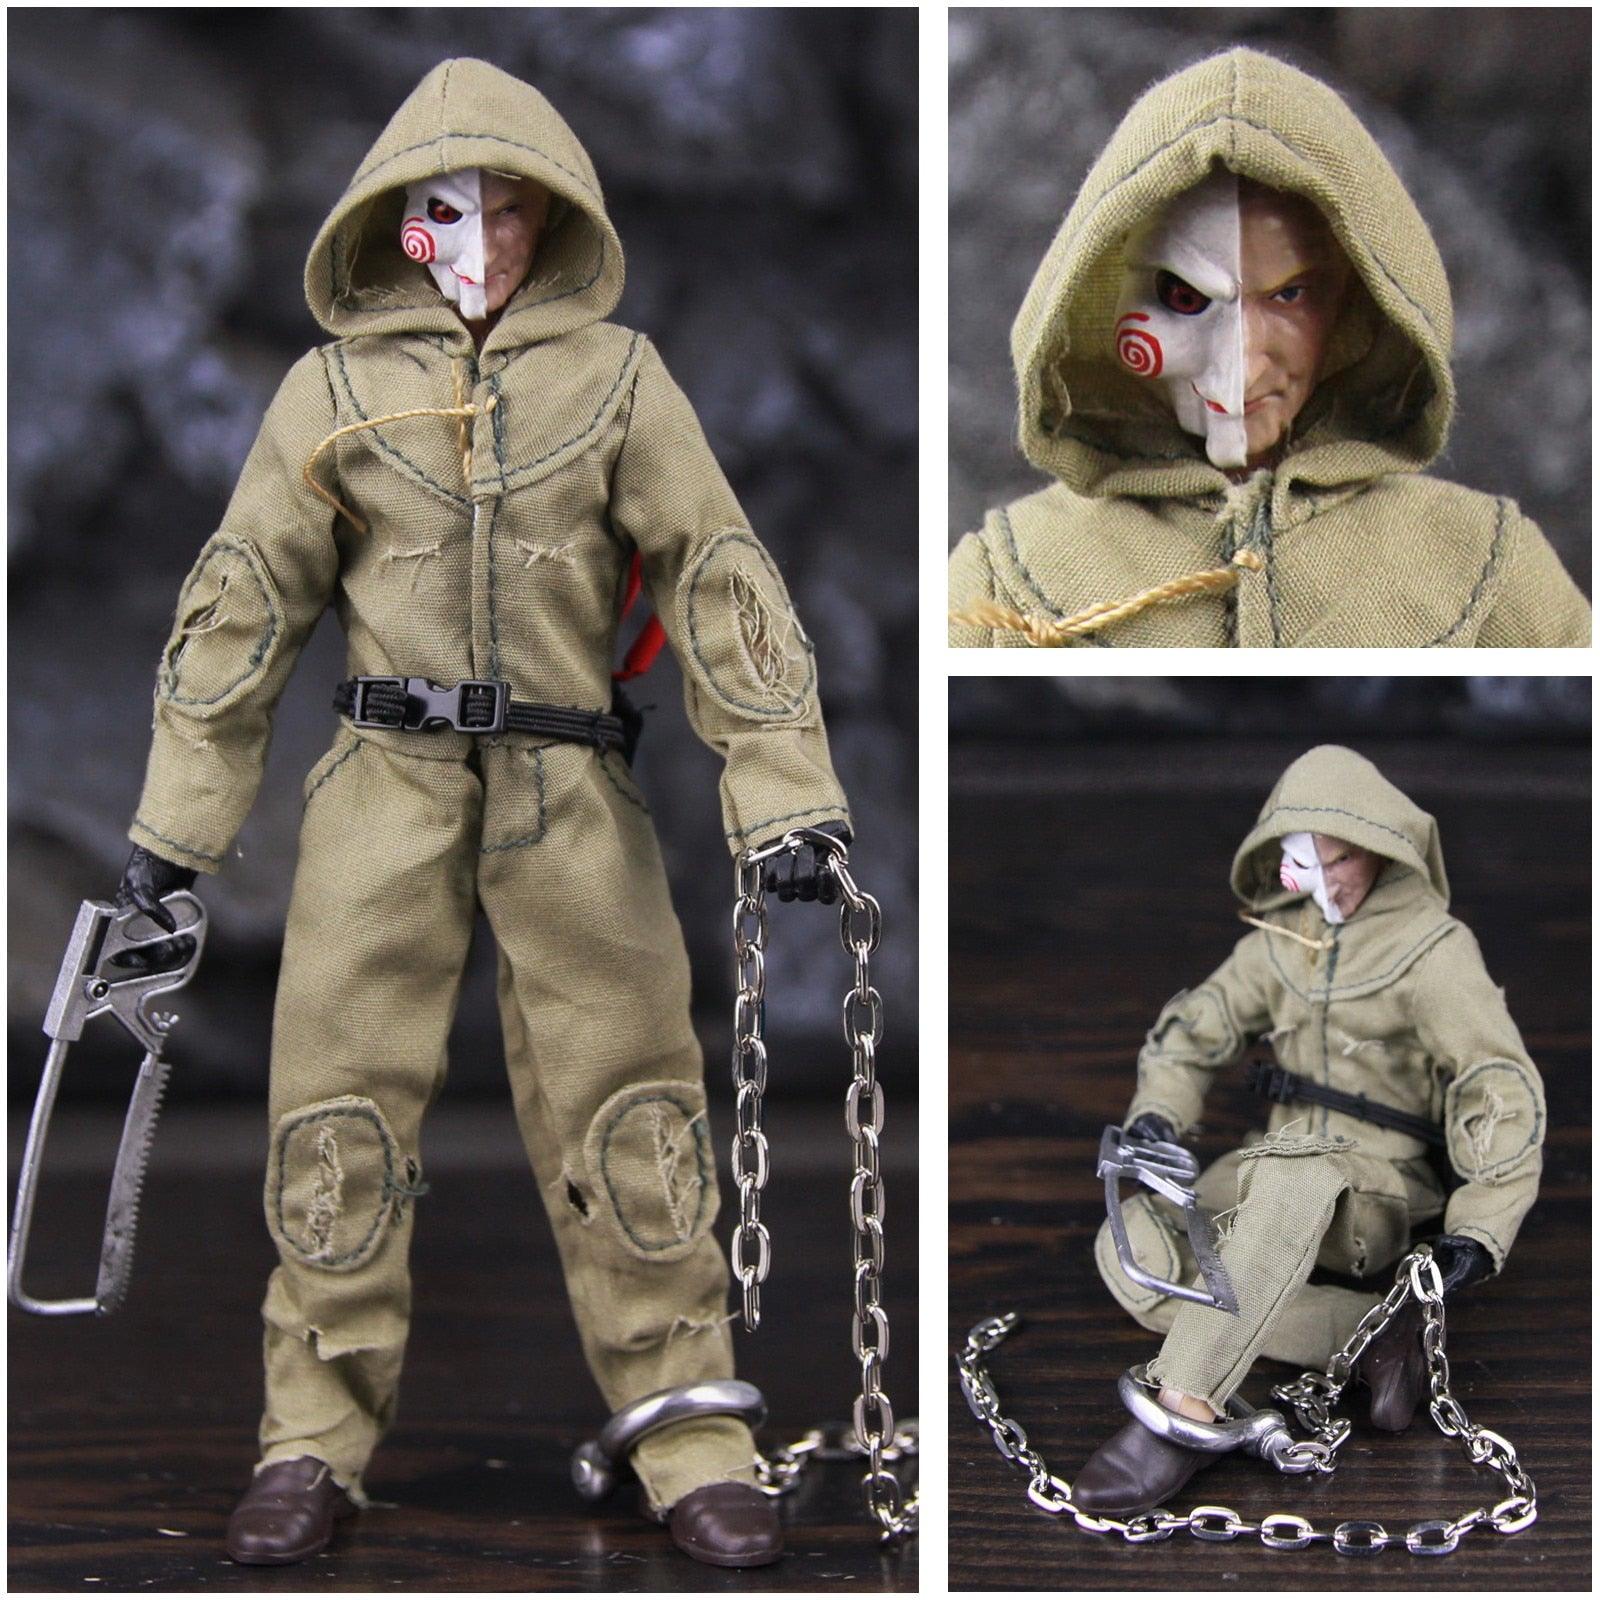 Action Figure Classic Horror Movie Film Jigsaw SAW - All Halloween Costumes